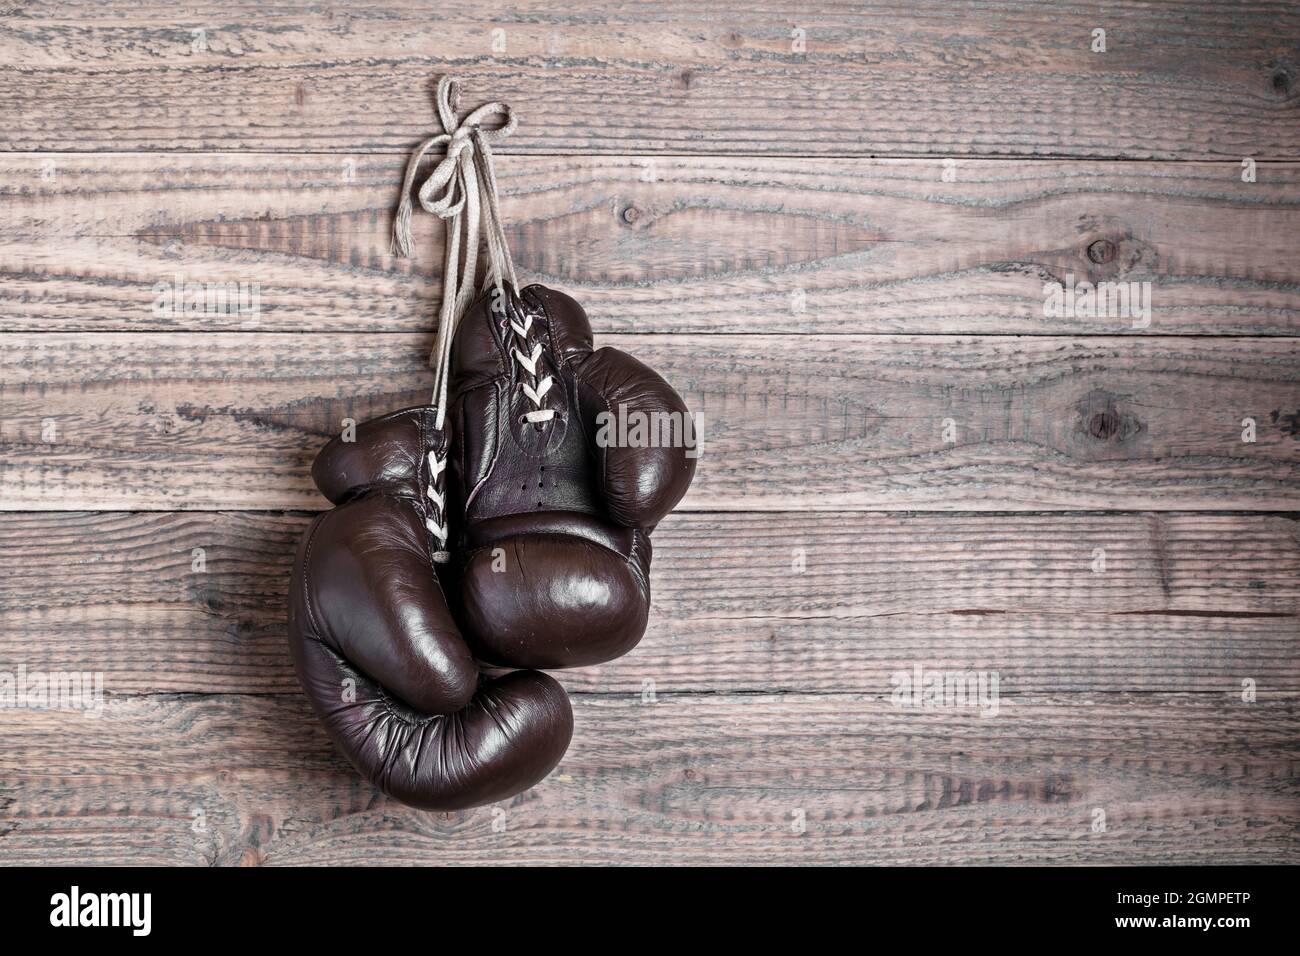 old boxing gloves hanging in front of rustic wooden wall Stock Photo